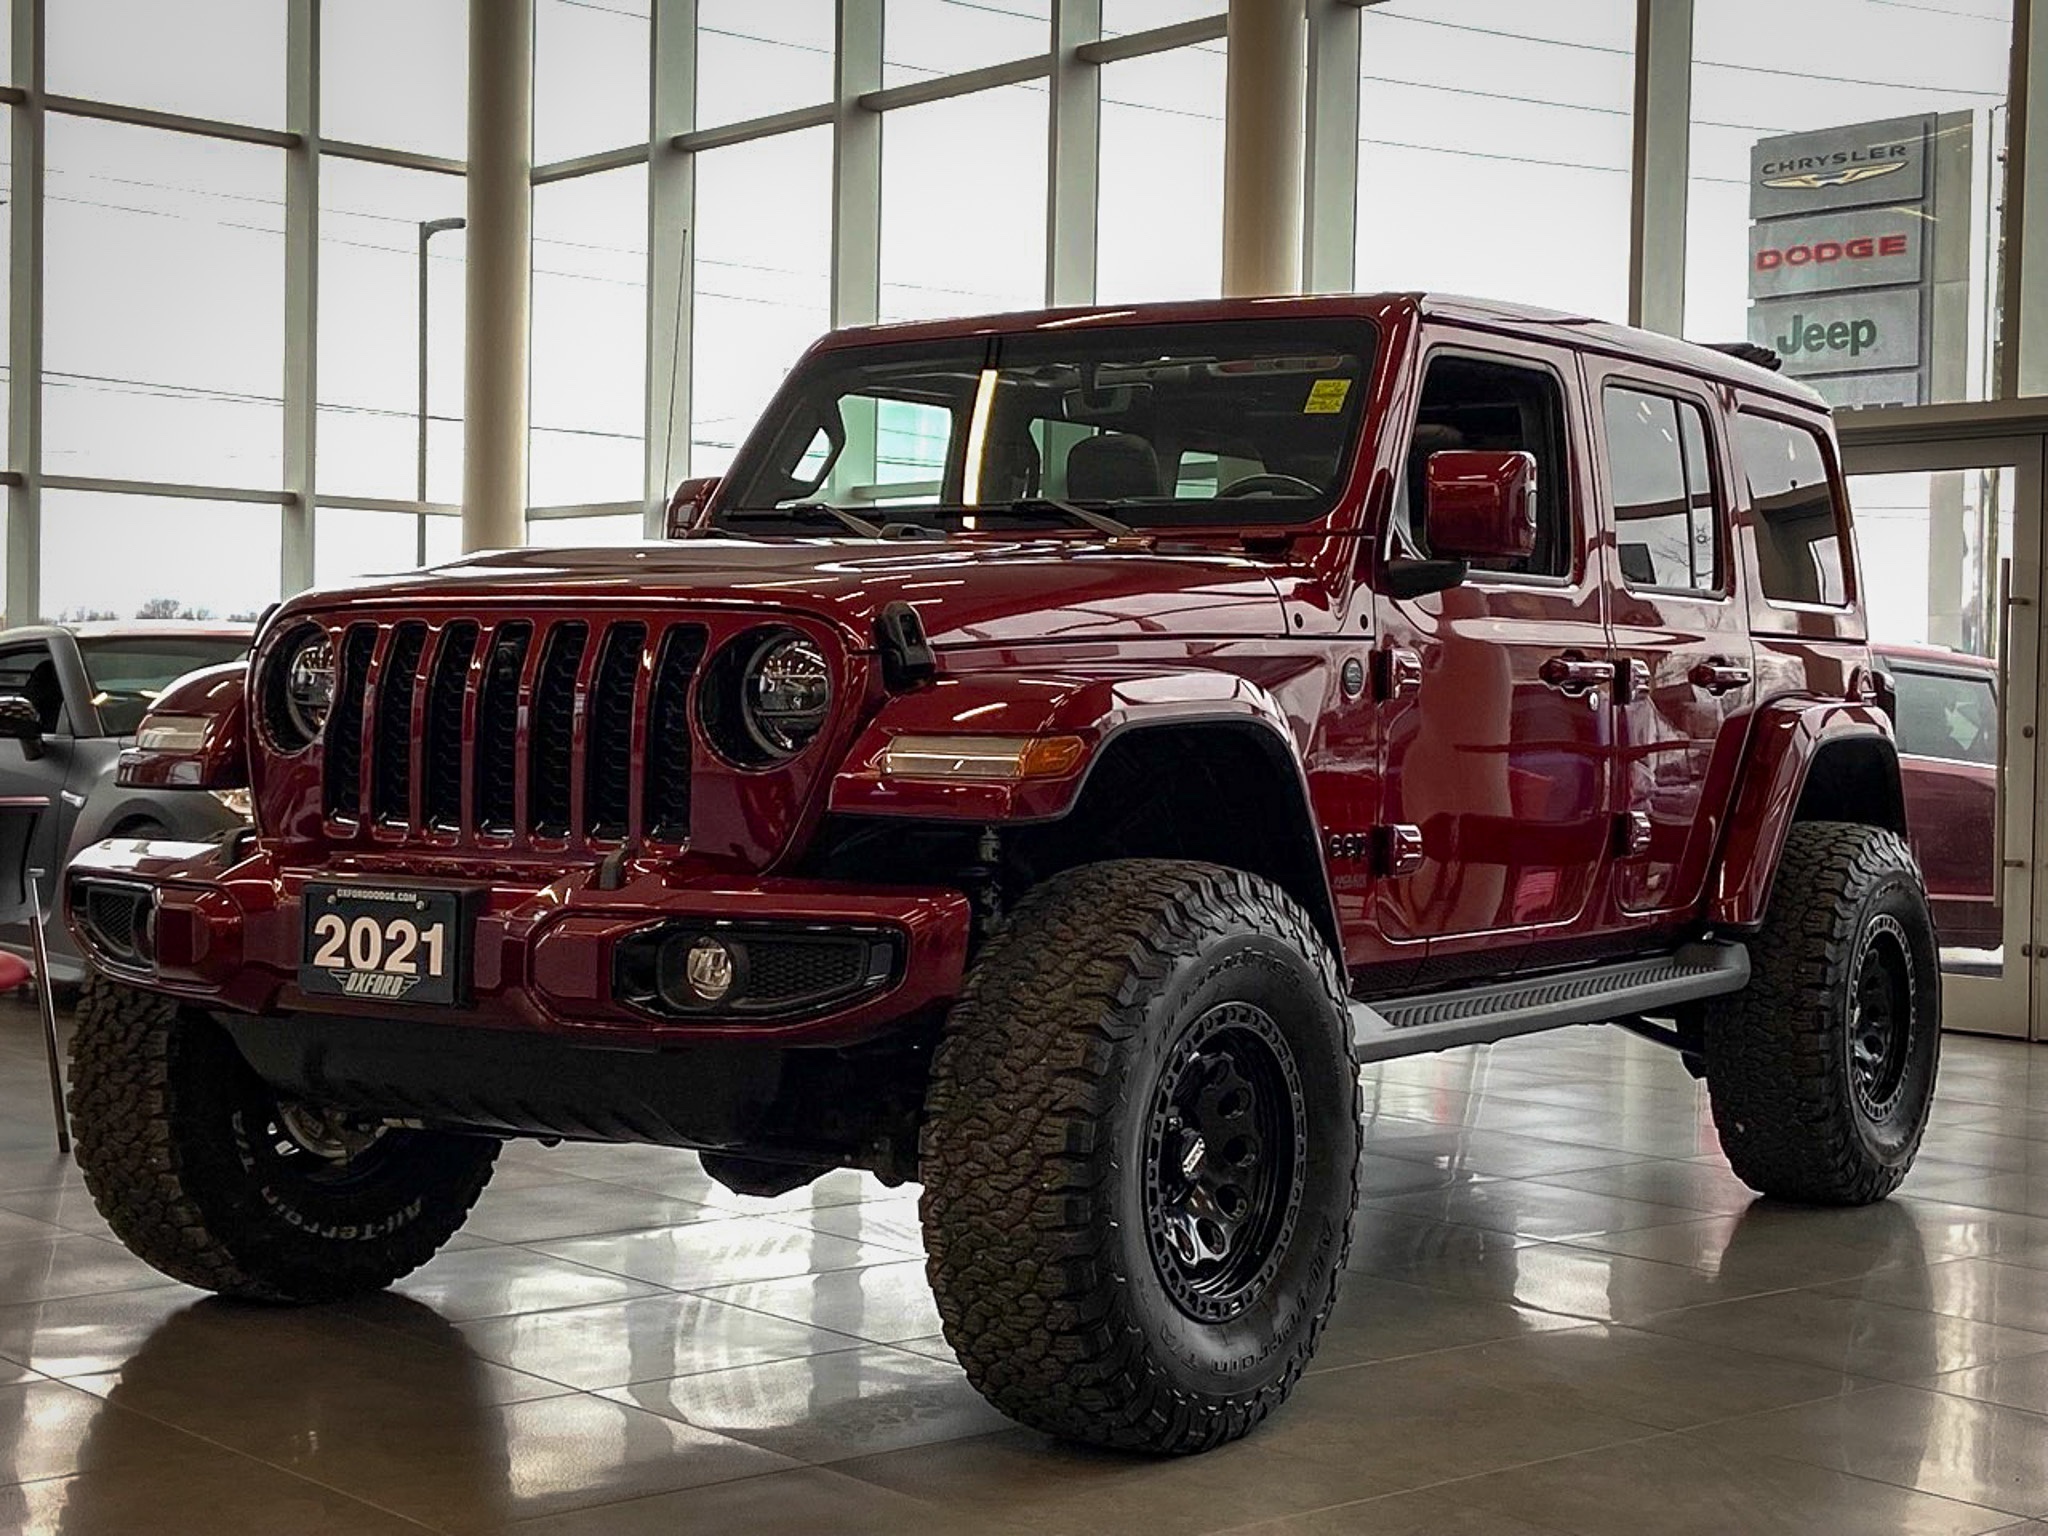 2021 Jeep WRANGLER UNLIMITED Sahara As New Condition, Power Roof